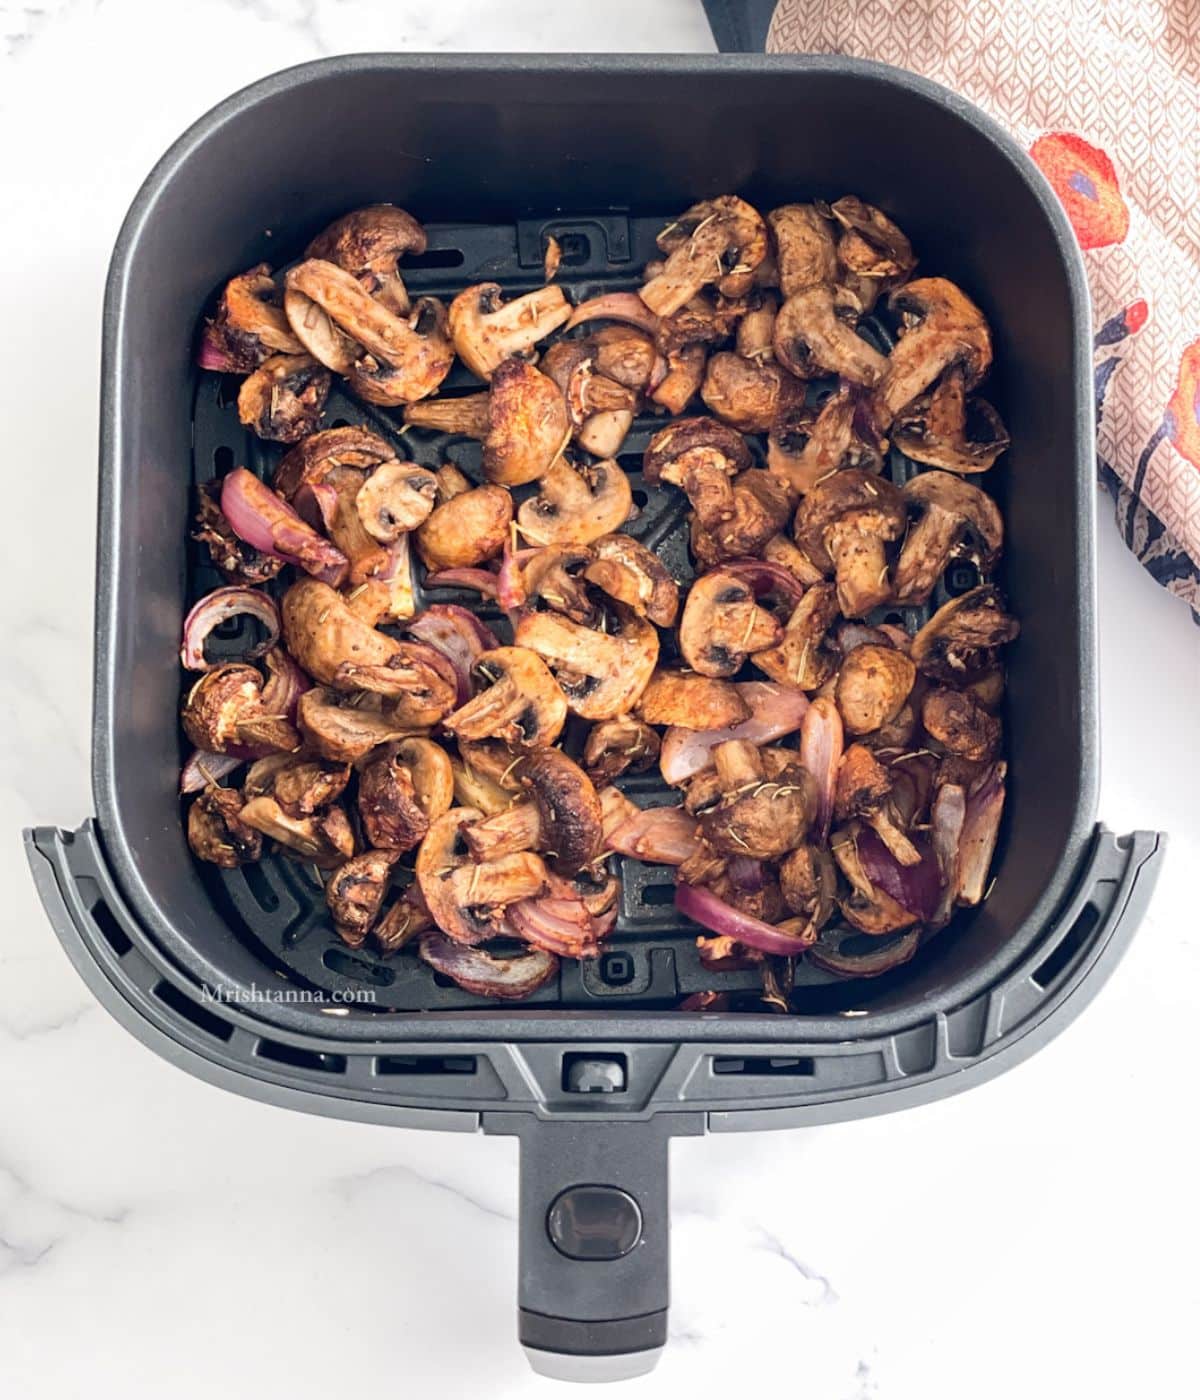 Air fryer basket is with roasted mushrooms and onions.